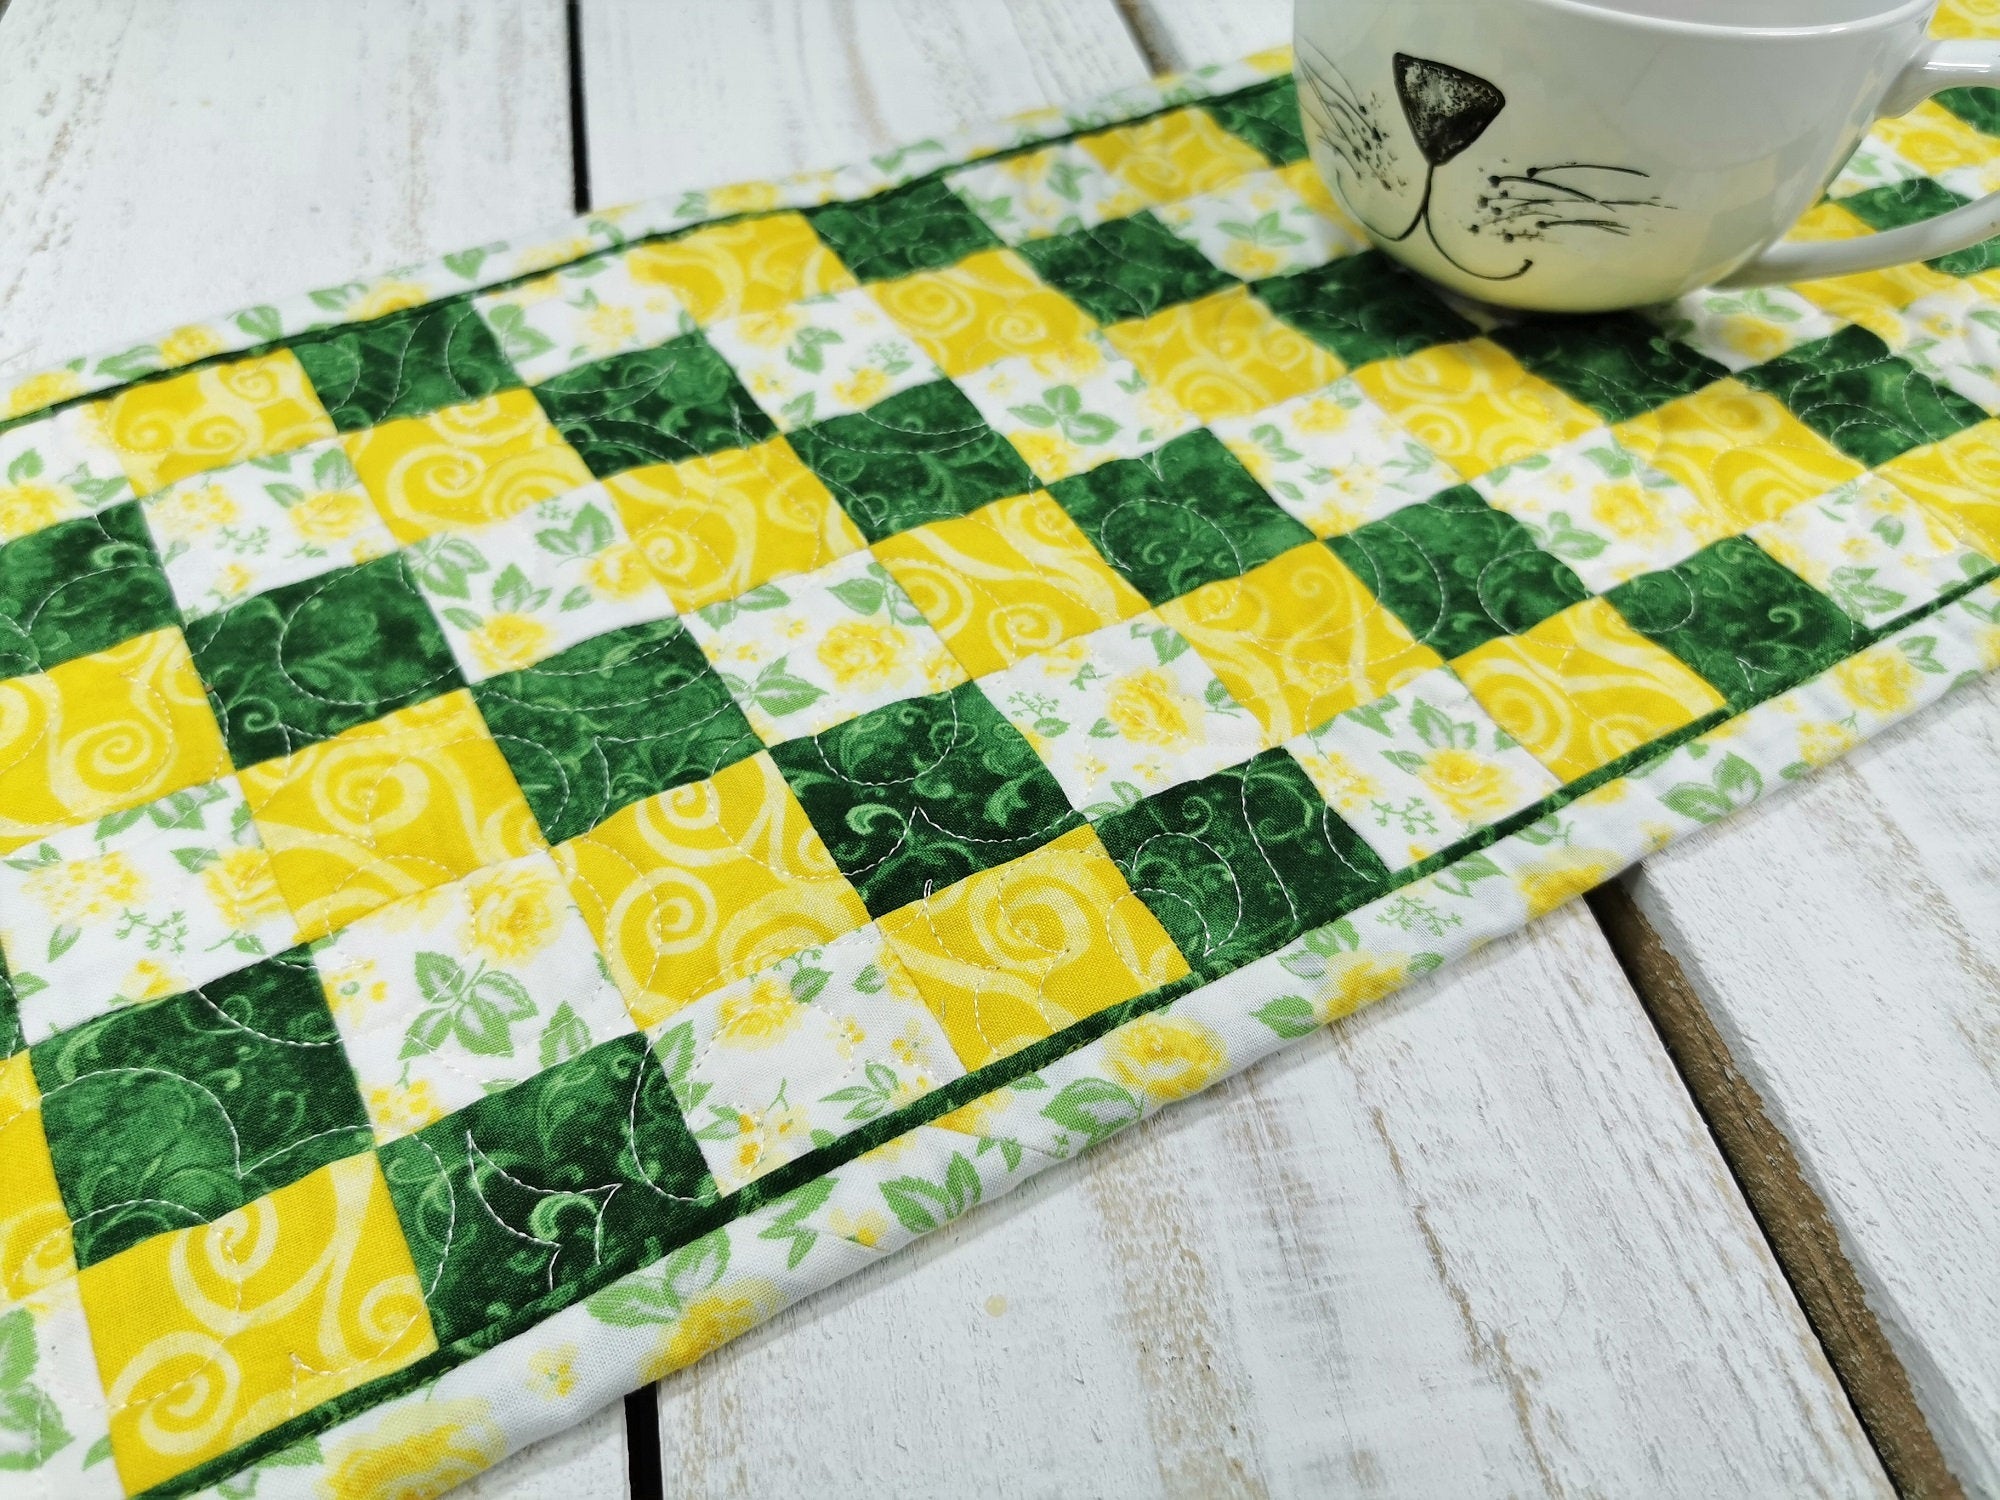 quilted table runner shown on white wooden table with a cat face mug in upper right corner showing scale.